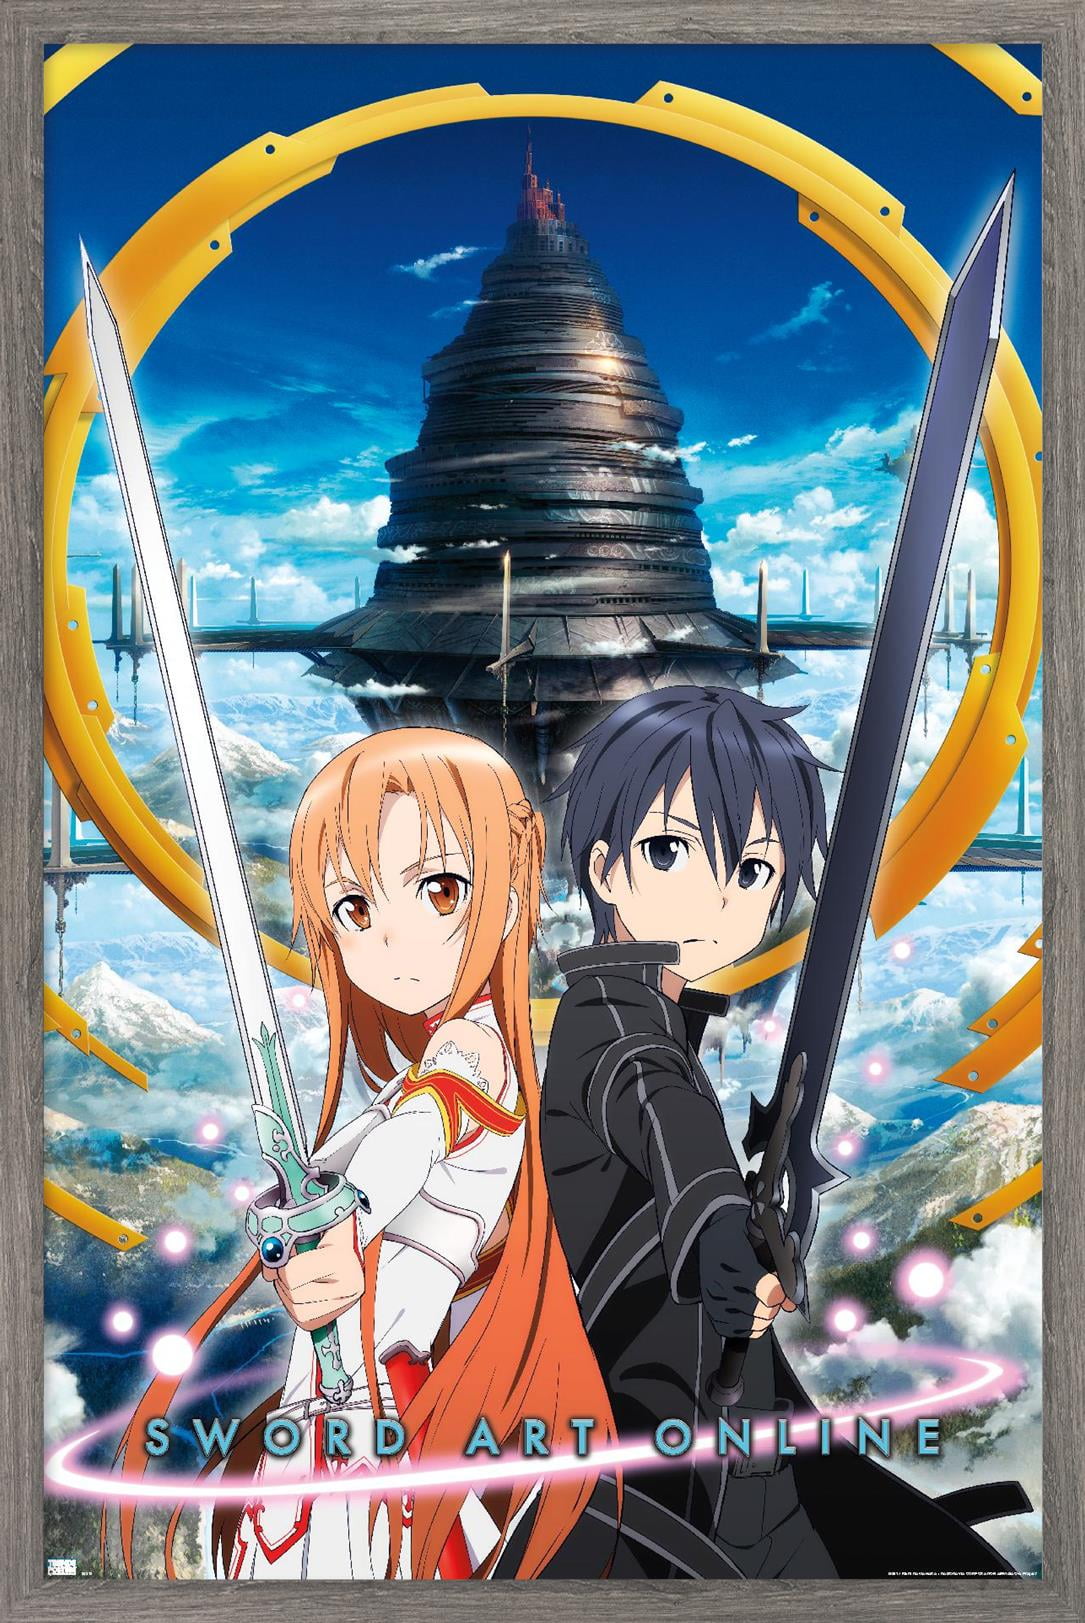 Sword Art Online Season 1 Group Poster Day Time Refrigerator Magnet NEW  UNUSED